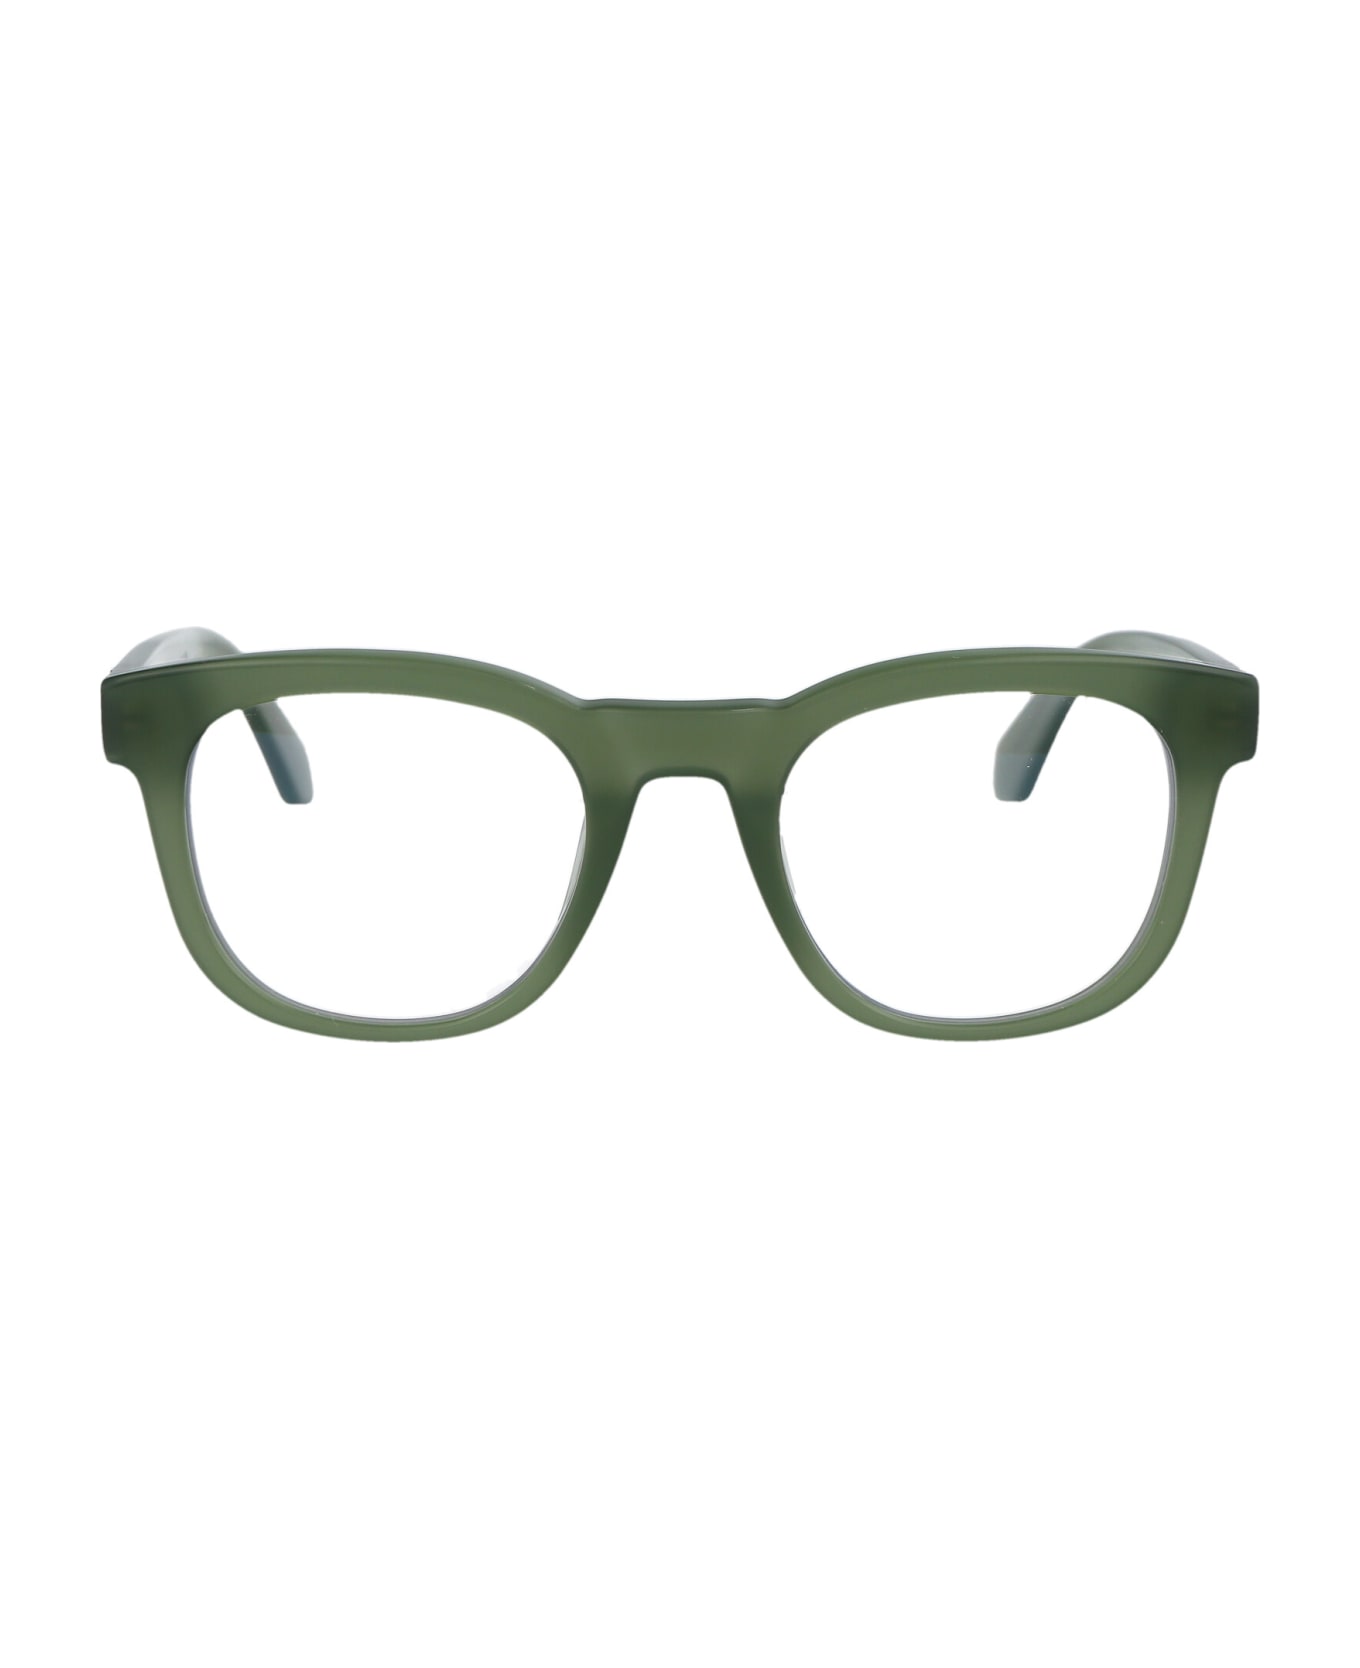 Off-White Optical Style 71 Glasses - 5900 OLIVE GREEN 